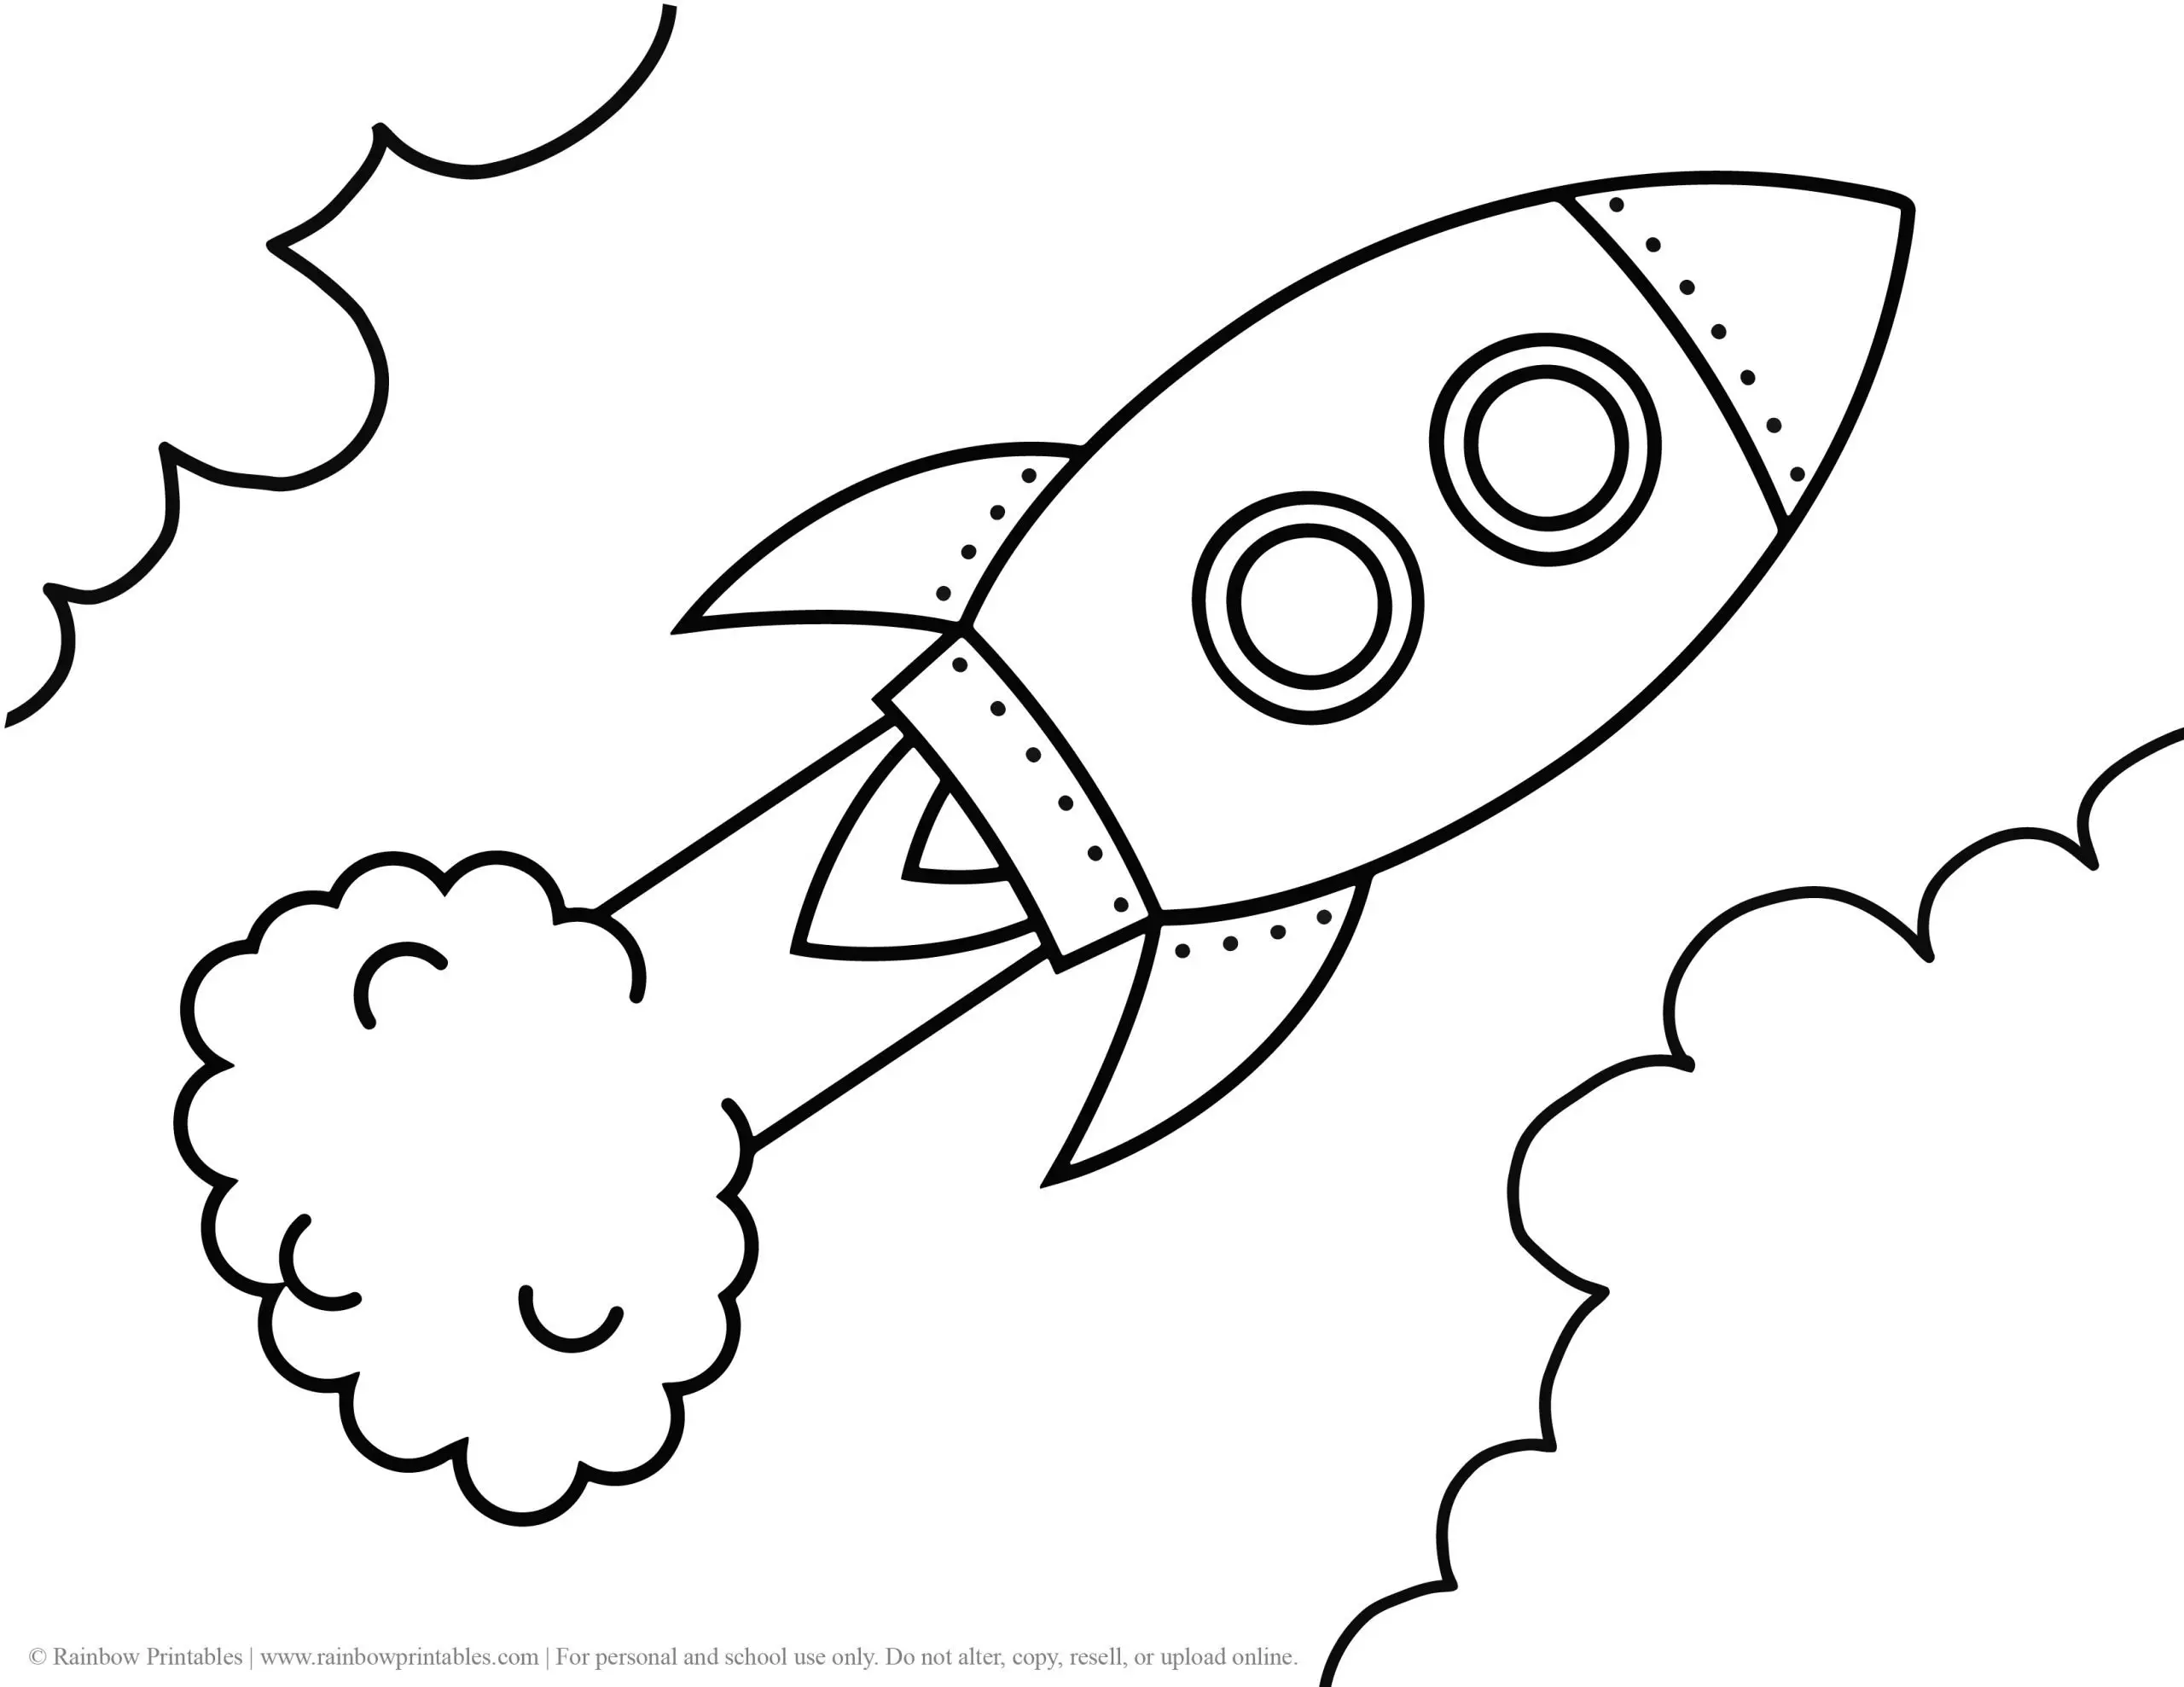 Astronaut, Rocket Ship, Outer Space Coloring Pages   Rainbow ...